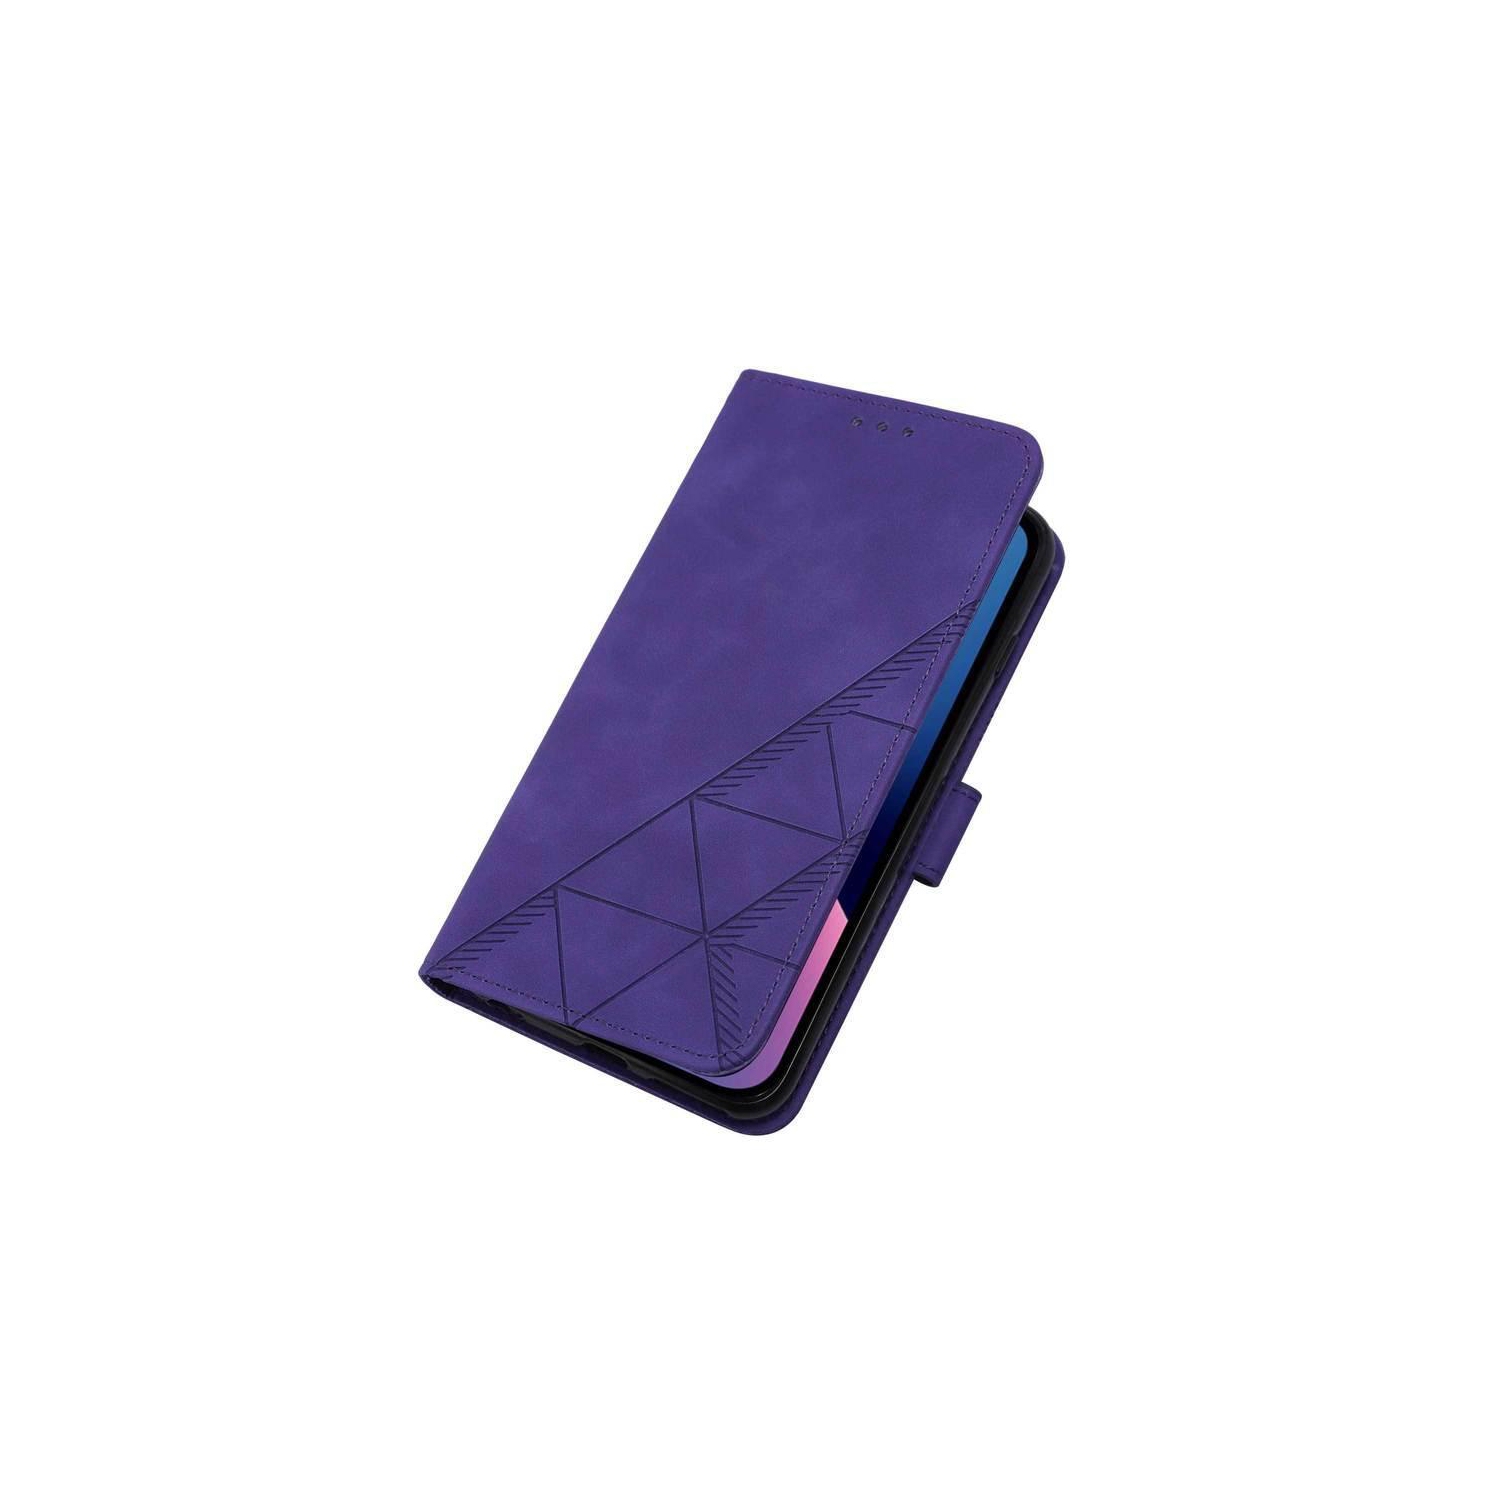 PANDACO Purple Suede Wallet Case for iPhone 7 or iPhone 8 or iPhone SE (2020/2022)